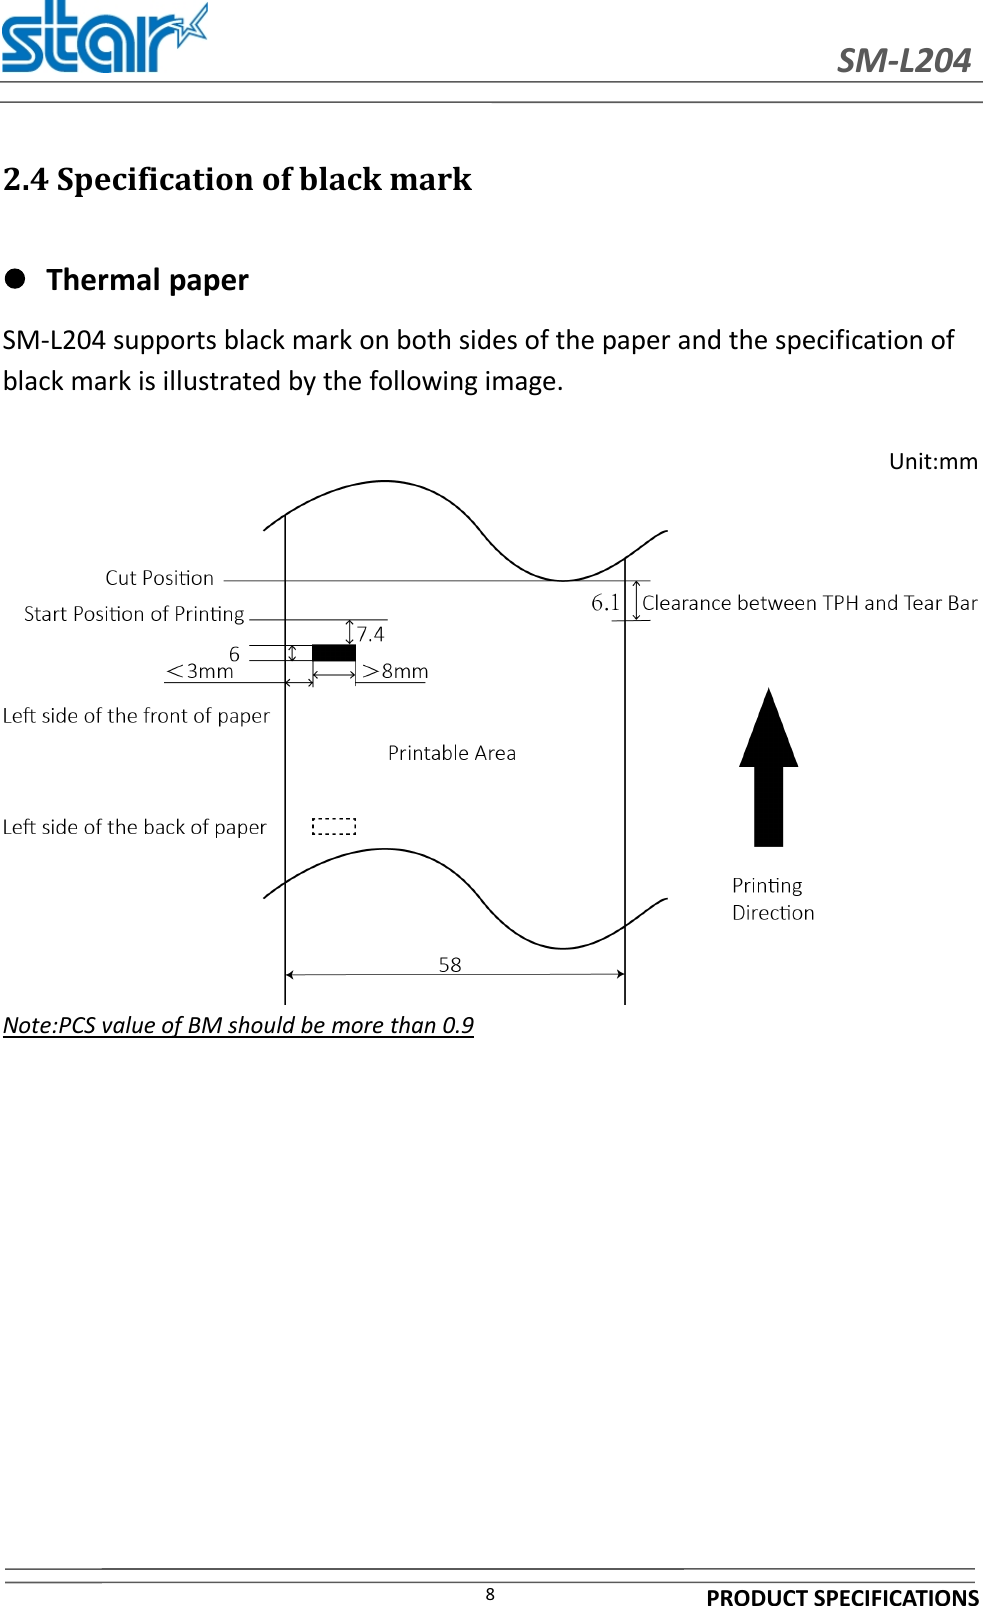 SM-L204PRODUCT SPECIFICATIONS82.4 Specification of black markThermal paperSM-L204 supports black mark on both sides of the paper and the specification ofblack mark is illustrated by the following image.Unit:mmNote:PCS value of BM should be more than 0.9